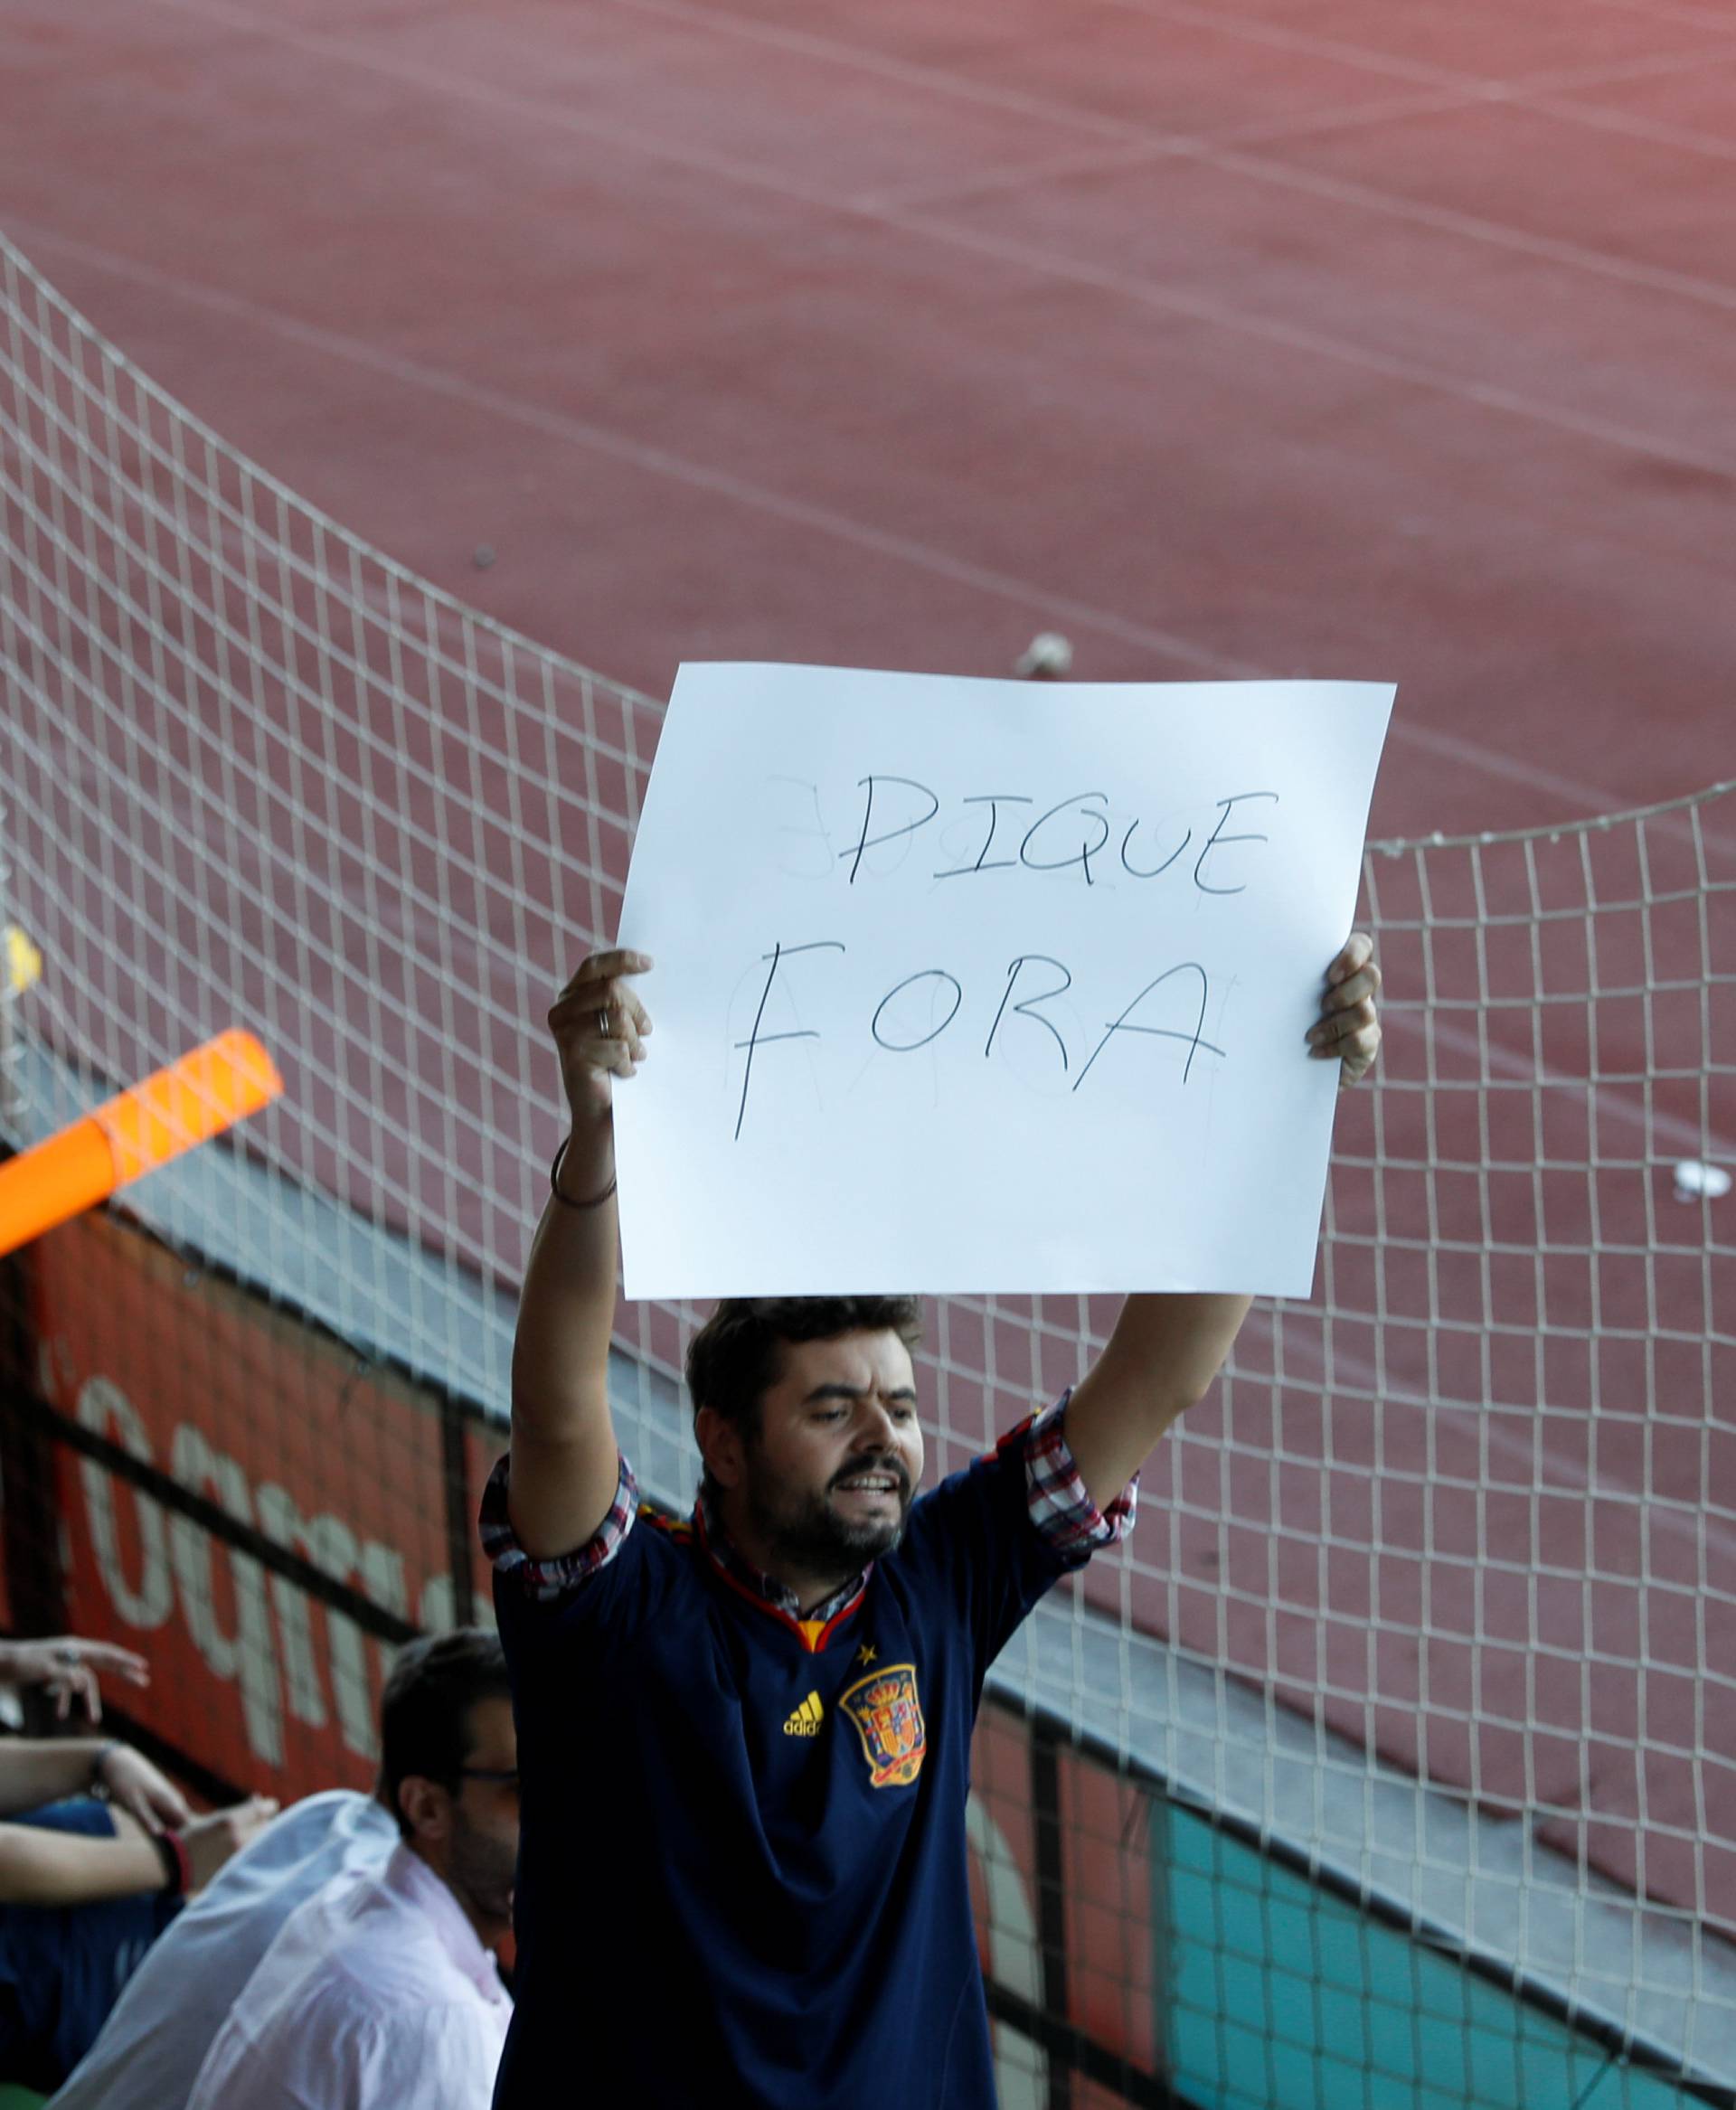 A man displays a banner that reads "Pique Out", referring to Spain's player Gerard Pique, before a training session in Las Rozas, near Madrid